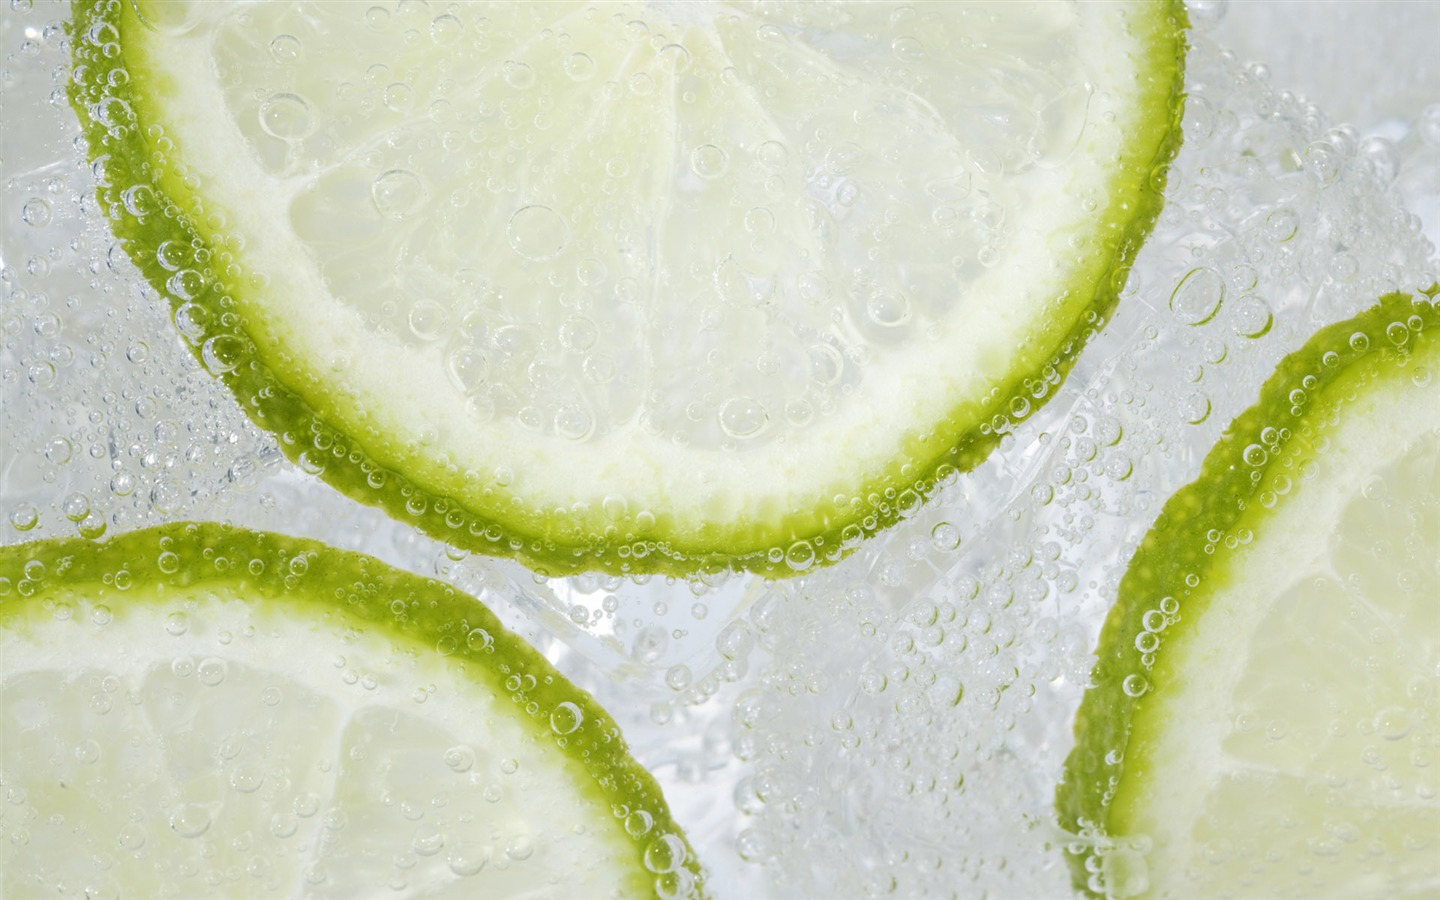 Ice-cold drinks Wallpaper #37 - 1440x900